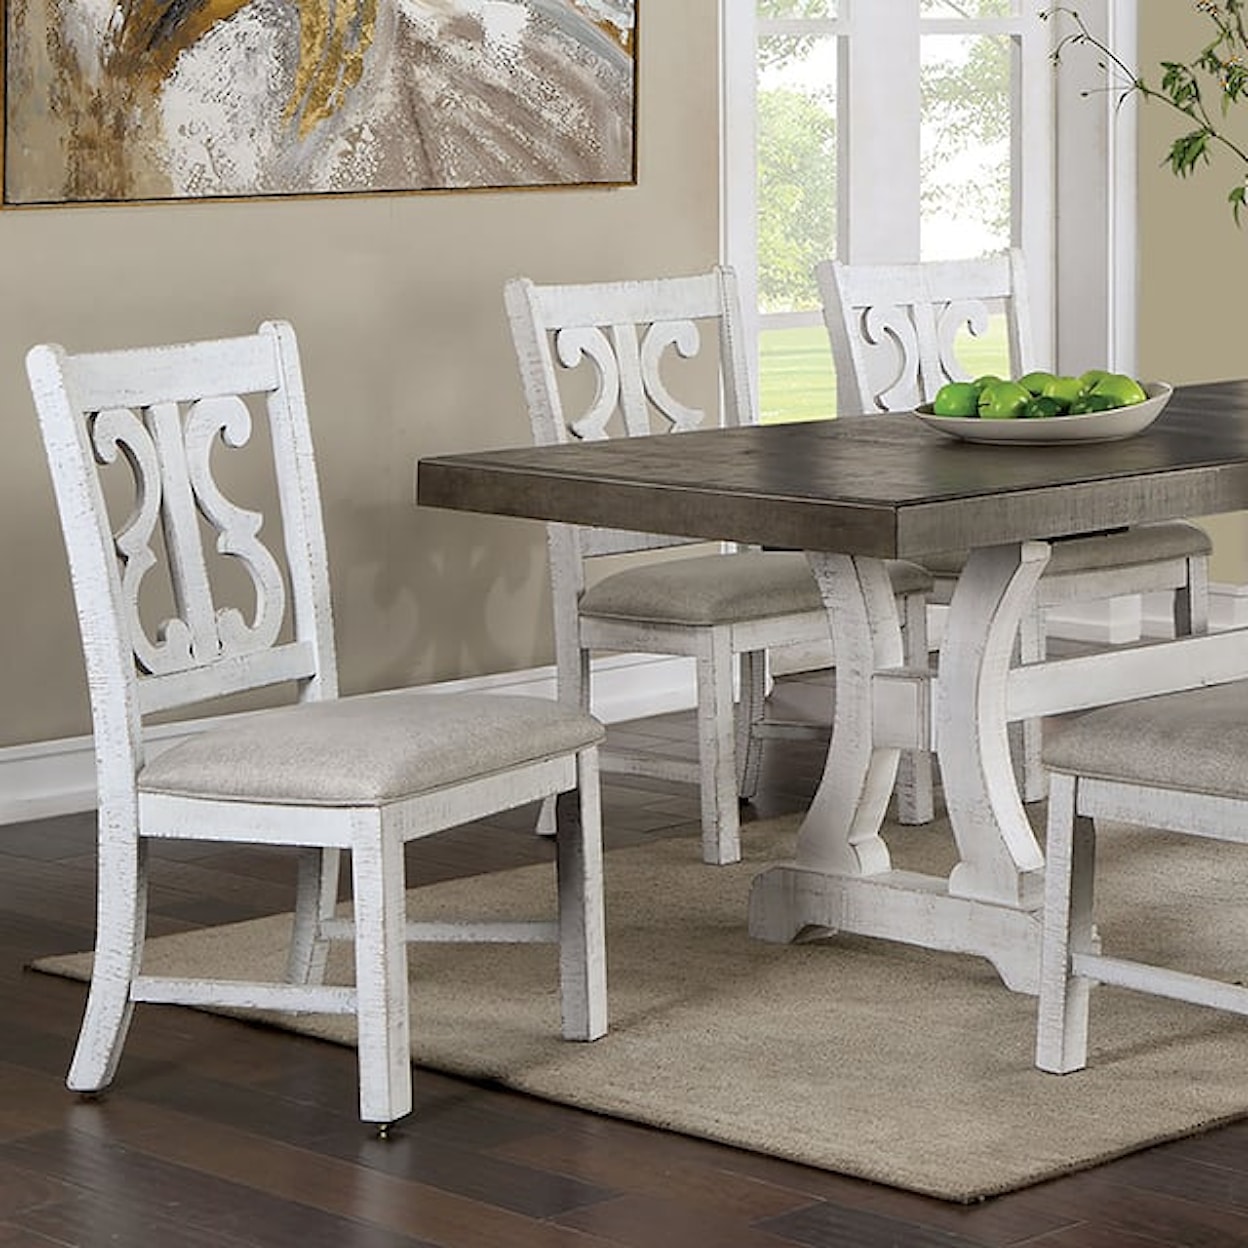 Furniture of America Auletta Dining Table with Trestle Base